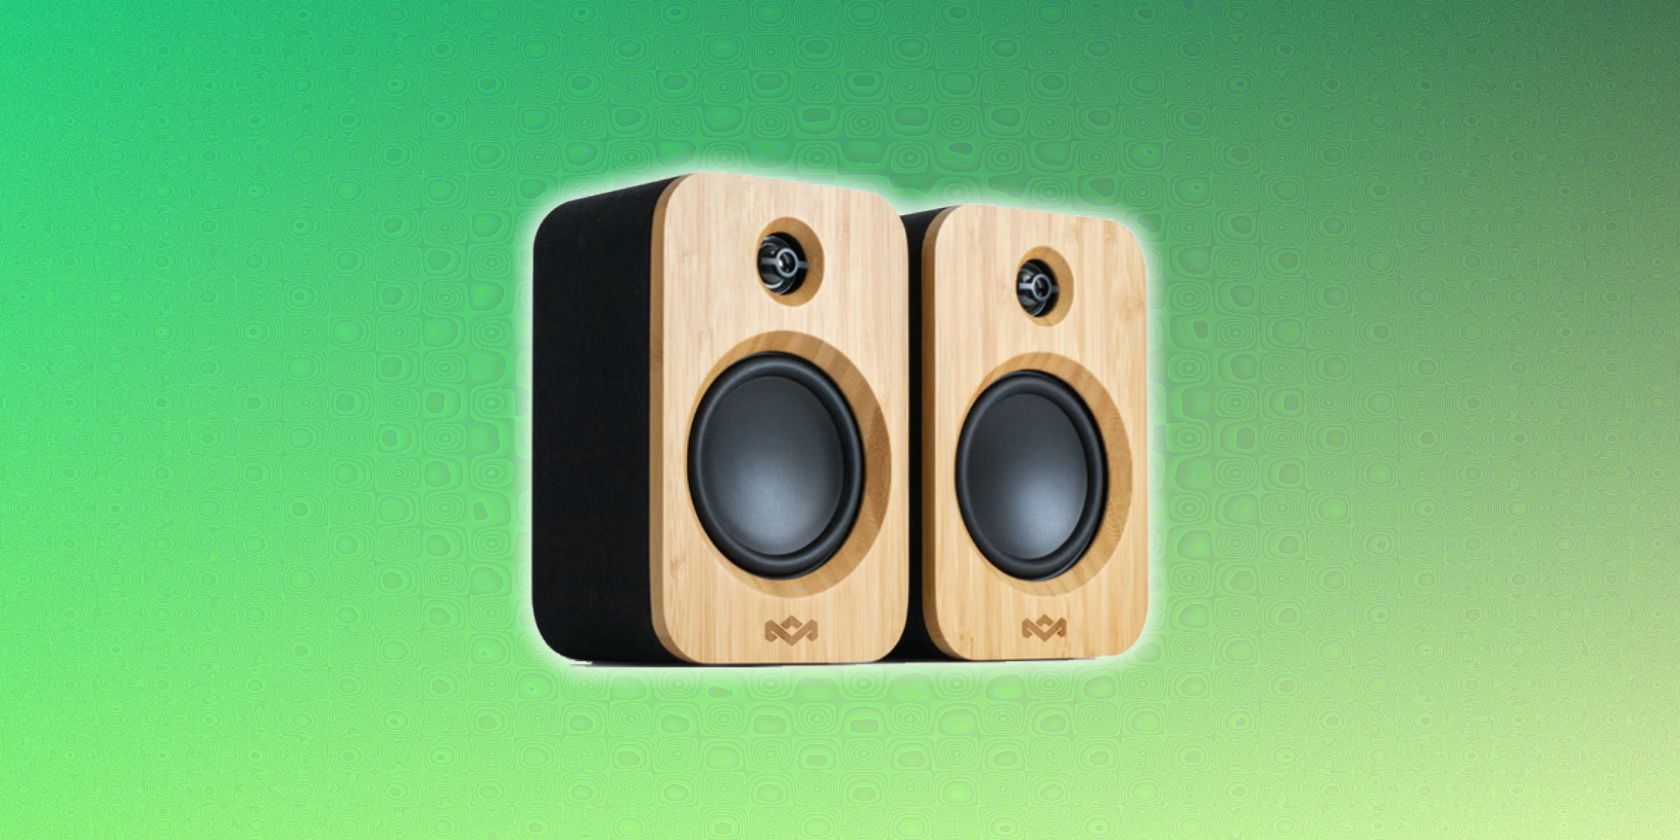 house of marley get together duo speakers feature